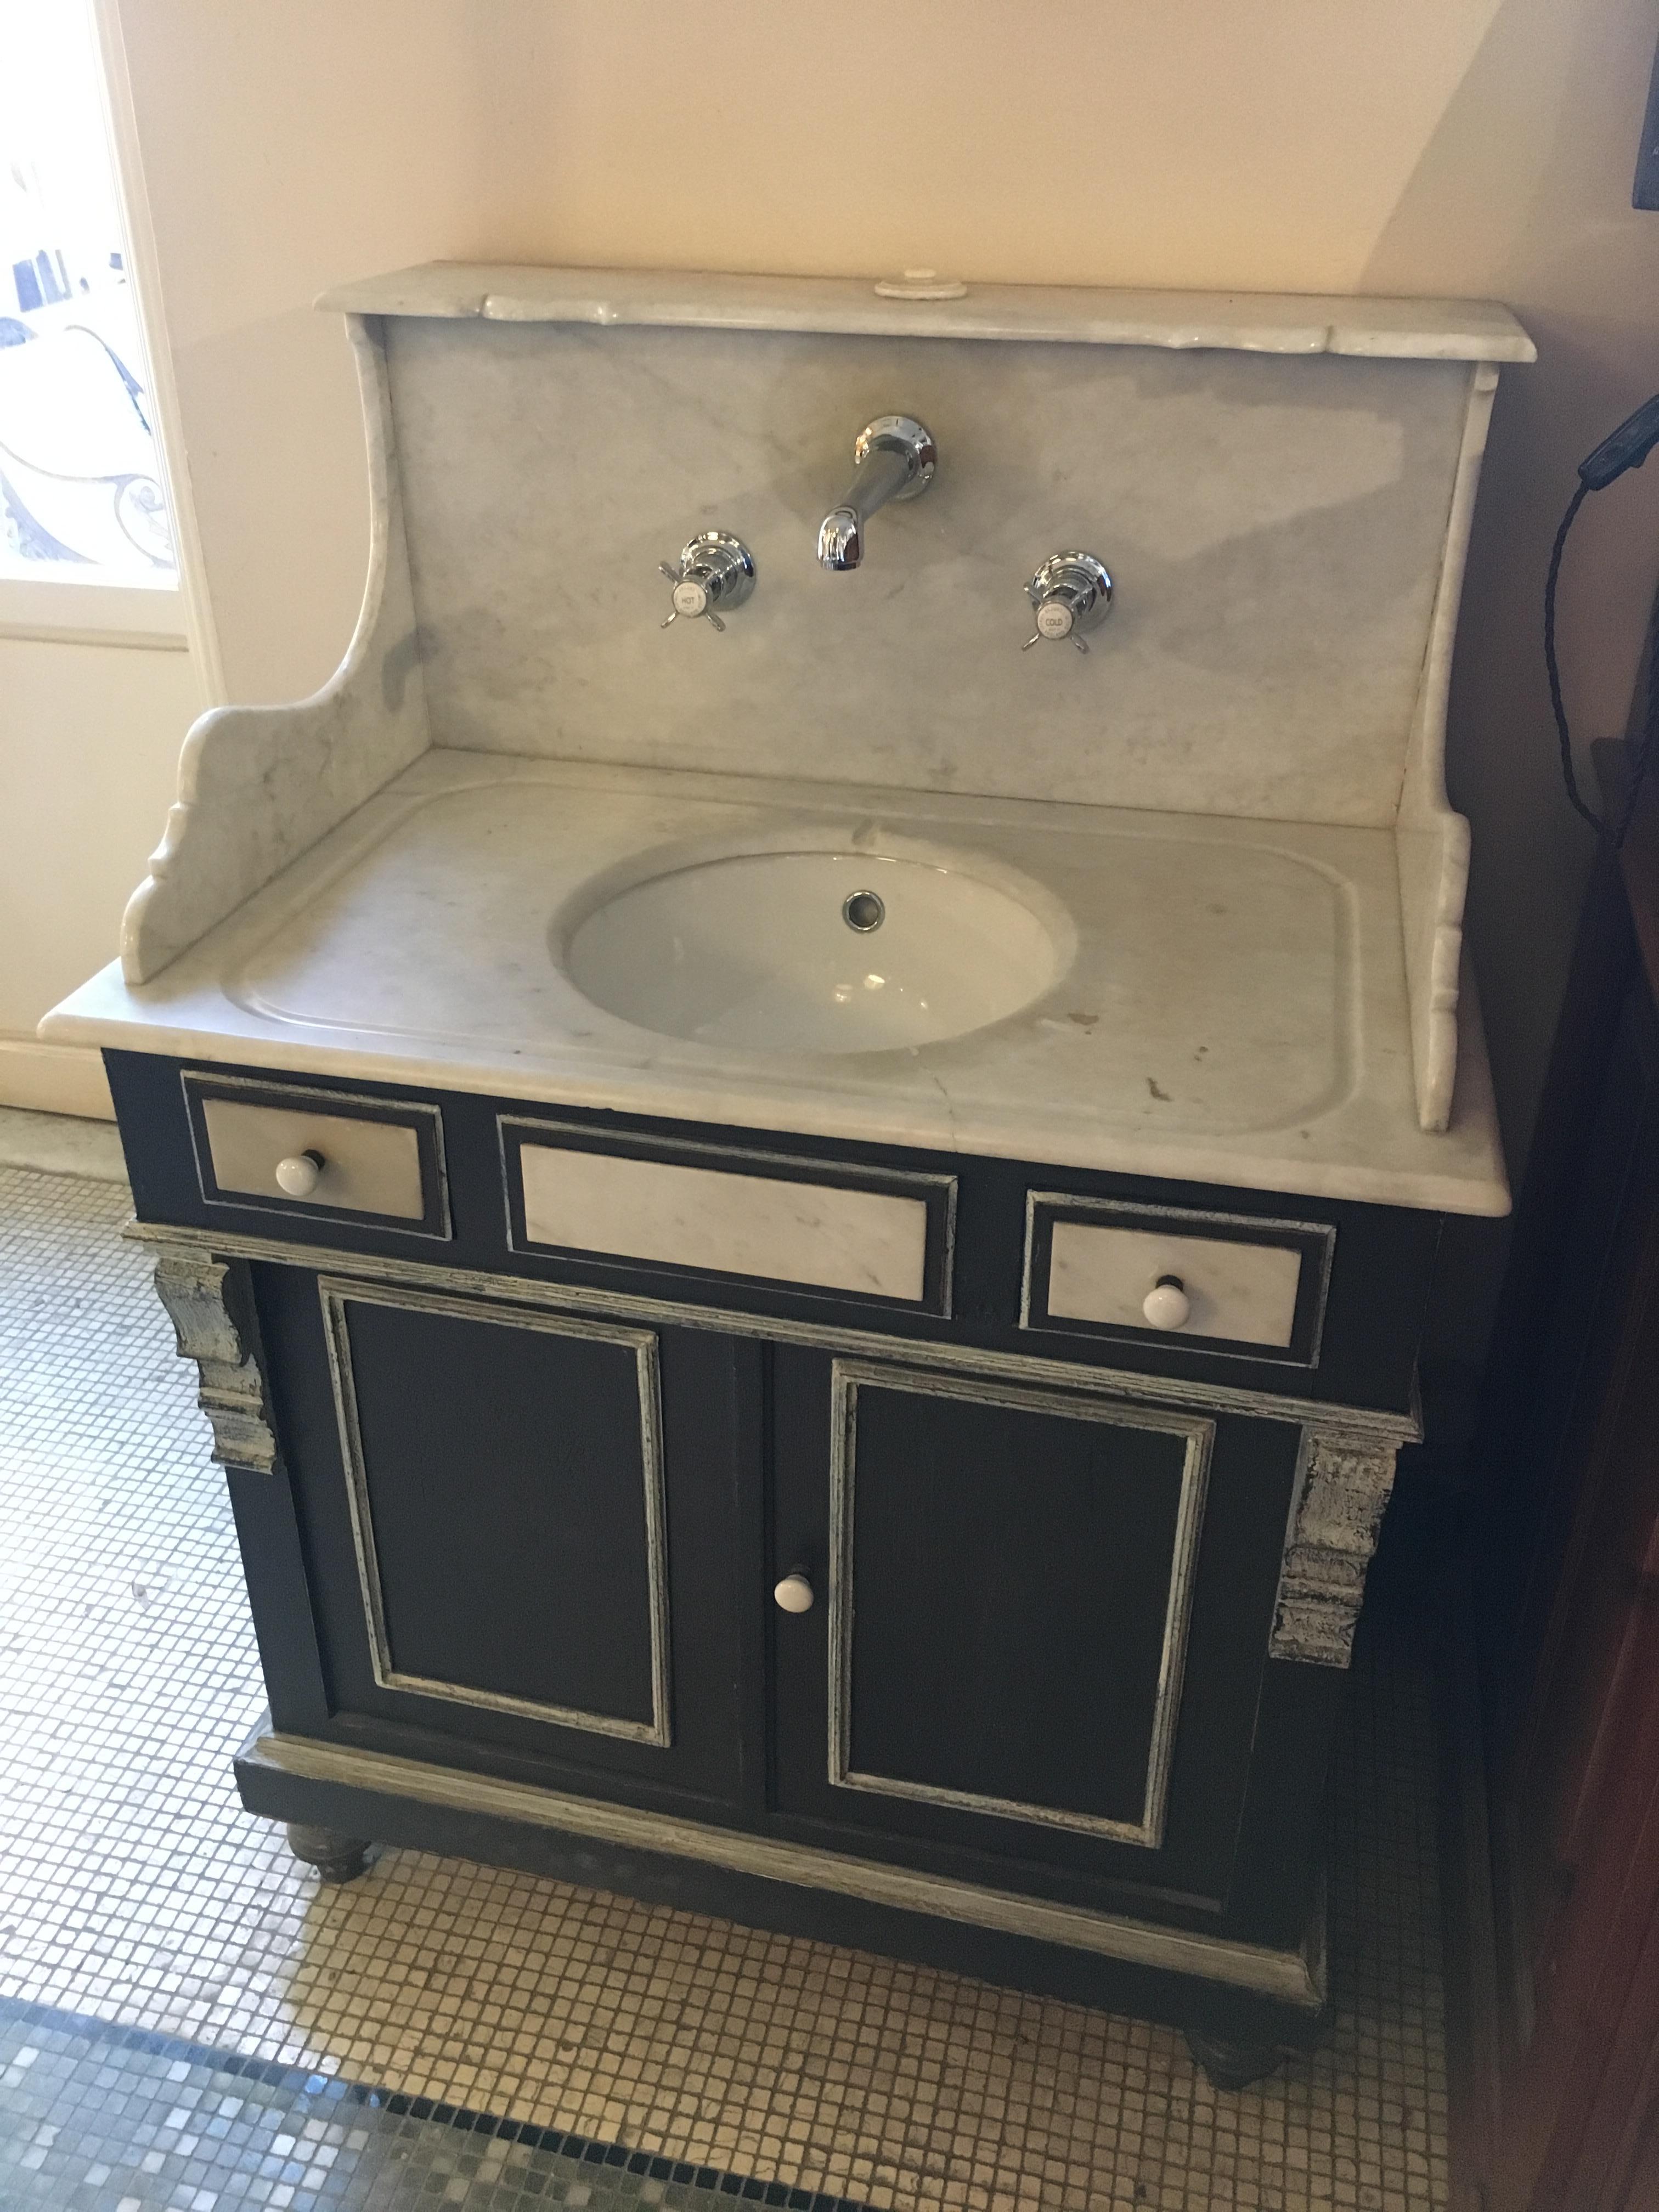 19th century French lacquered wood cupboard sink with Carrara marble top, 1890s.
Measures: Depth cm.61, width cm.80, top height cm.81, total height cm.115.